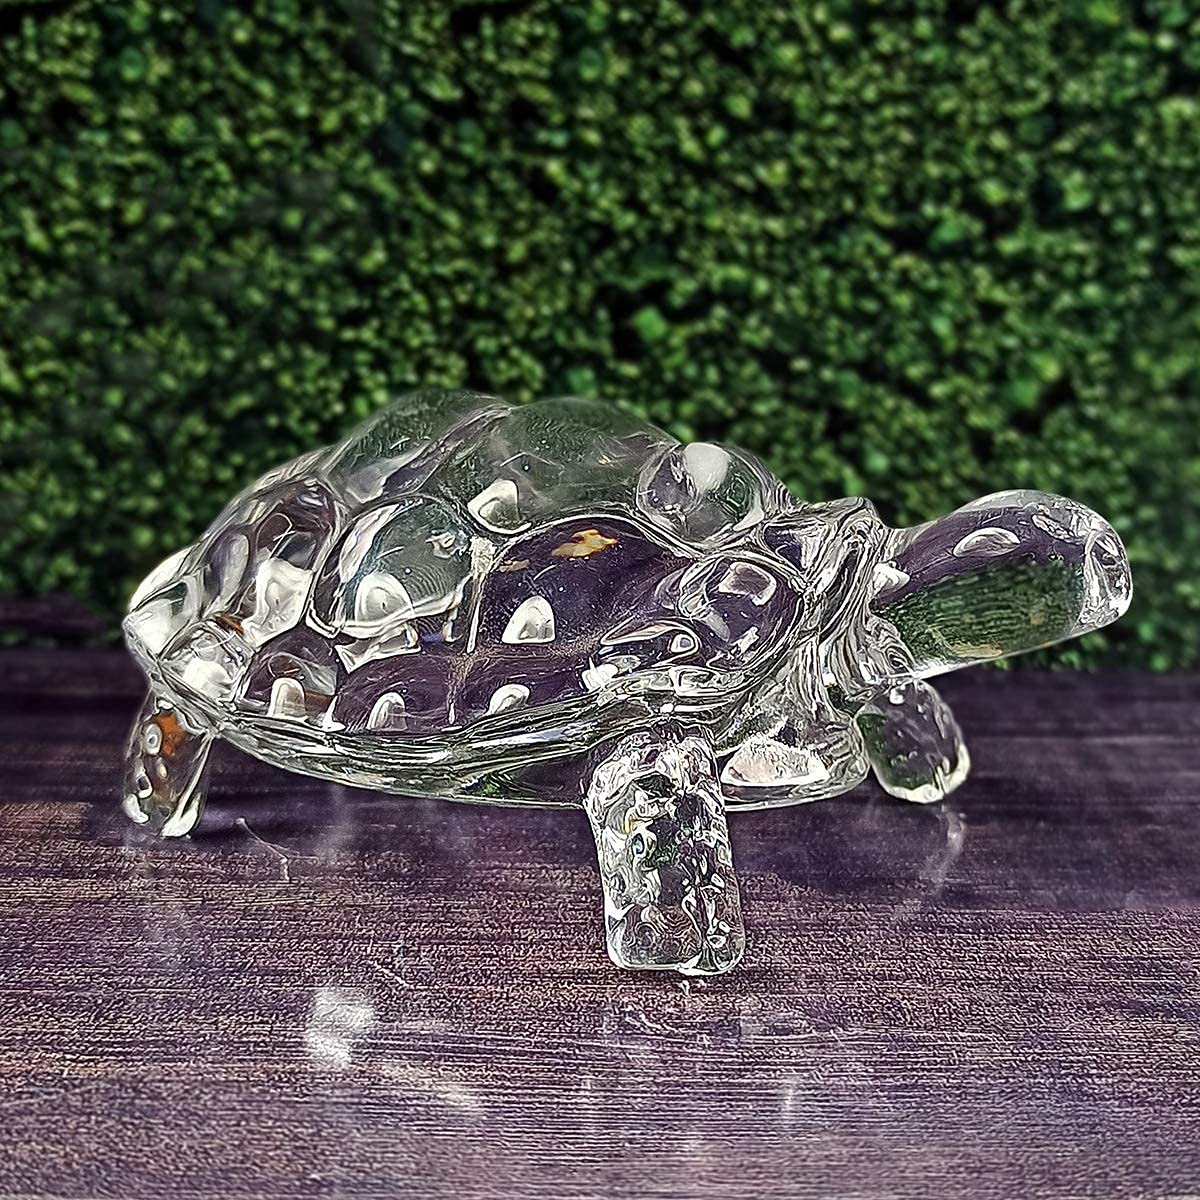 Crystal Tortoise Glass turtle with Beautiful Bowl Plate Vastu Set for Good Luck.